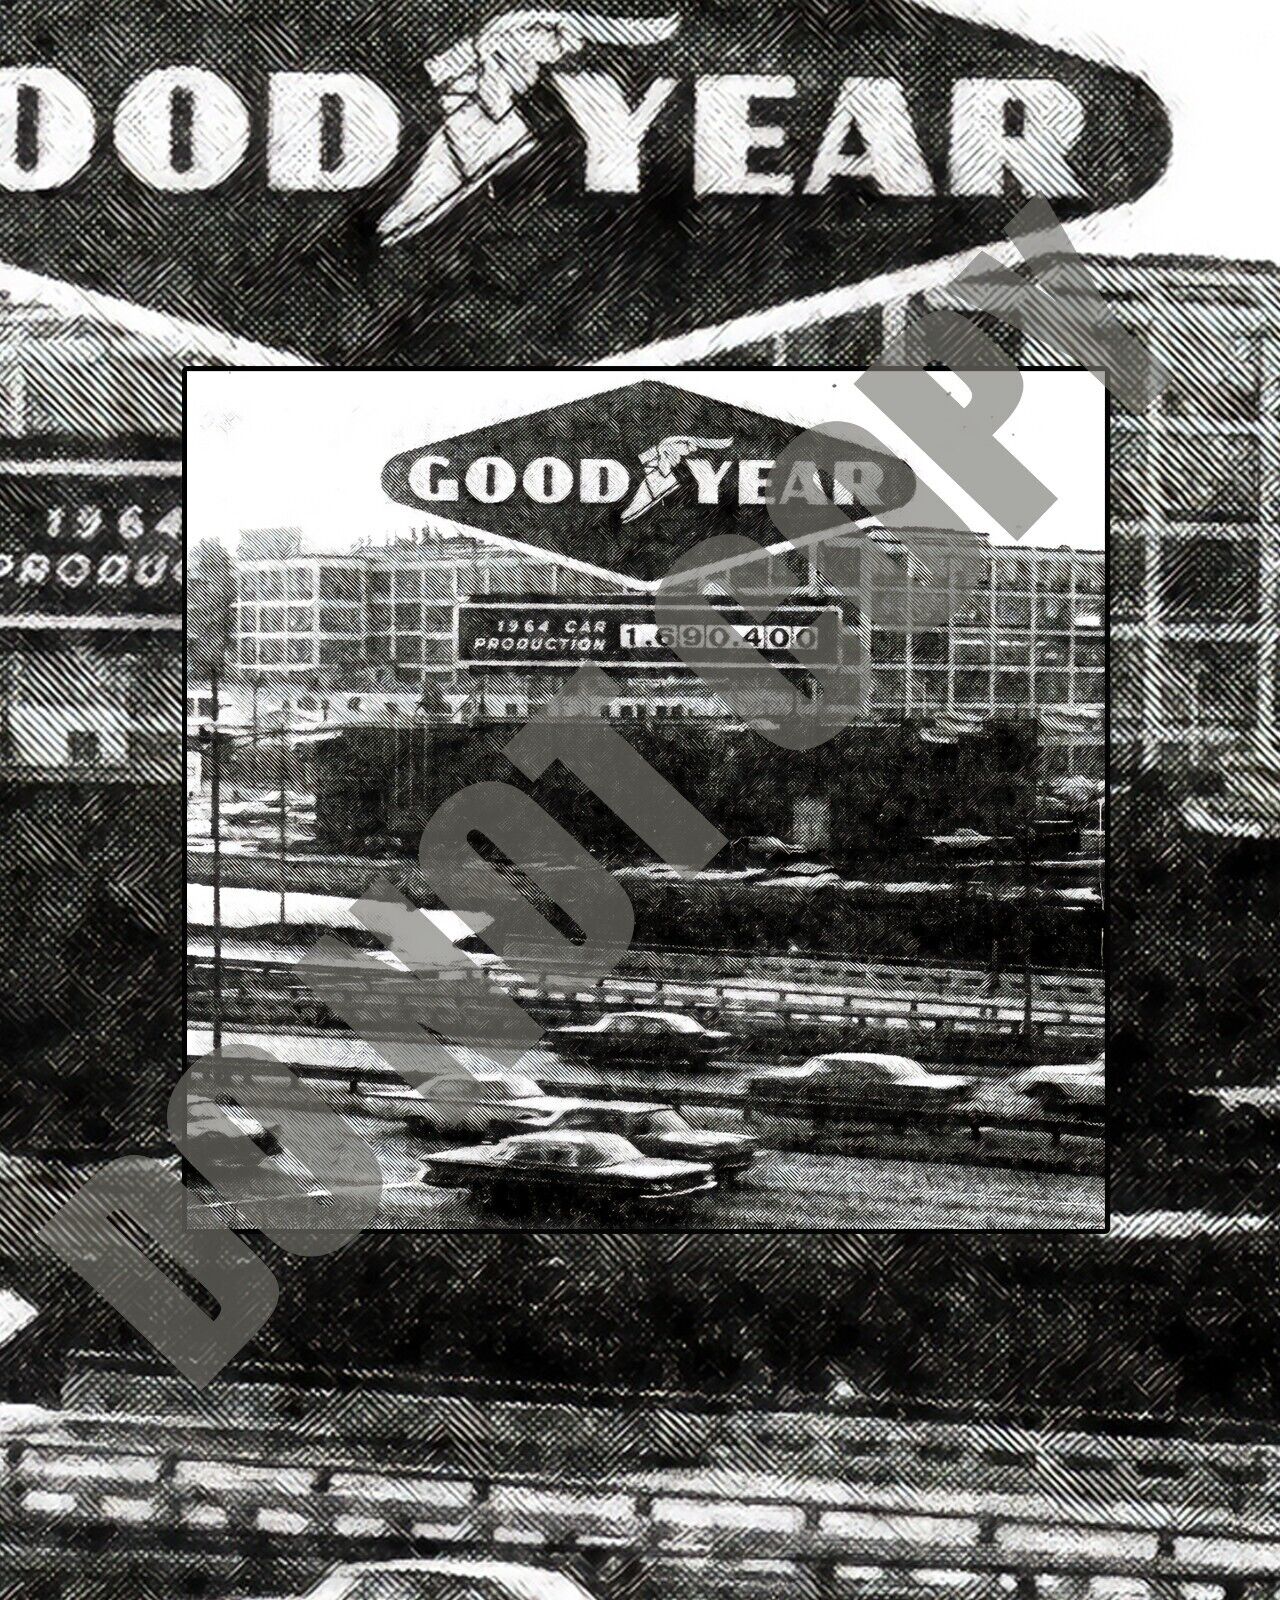 1964 Good Year Car Production Marque In Detroit Along Freeway 8x10 Photo